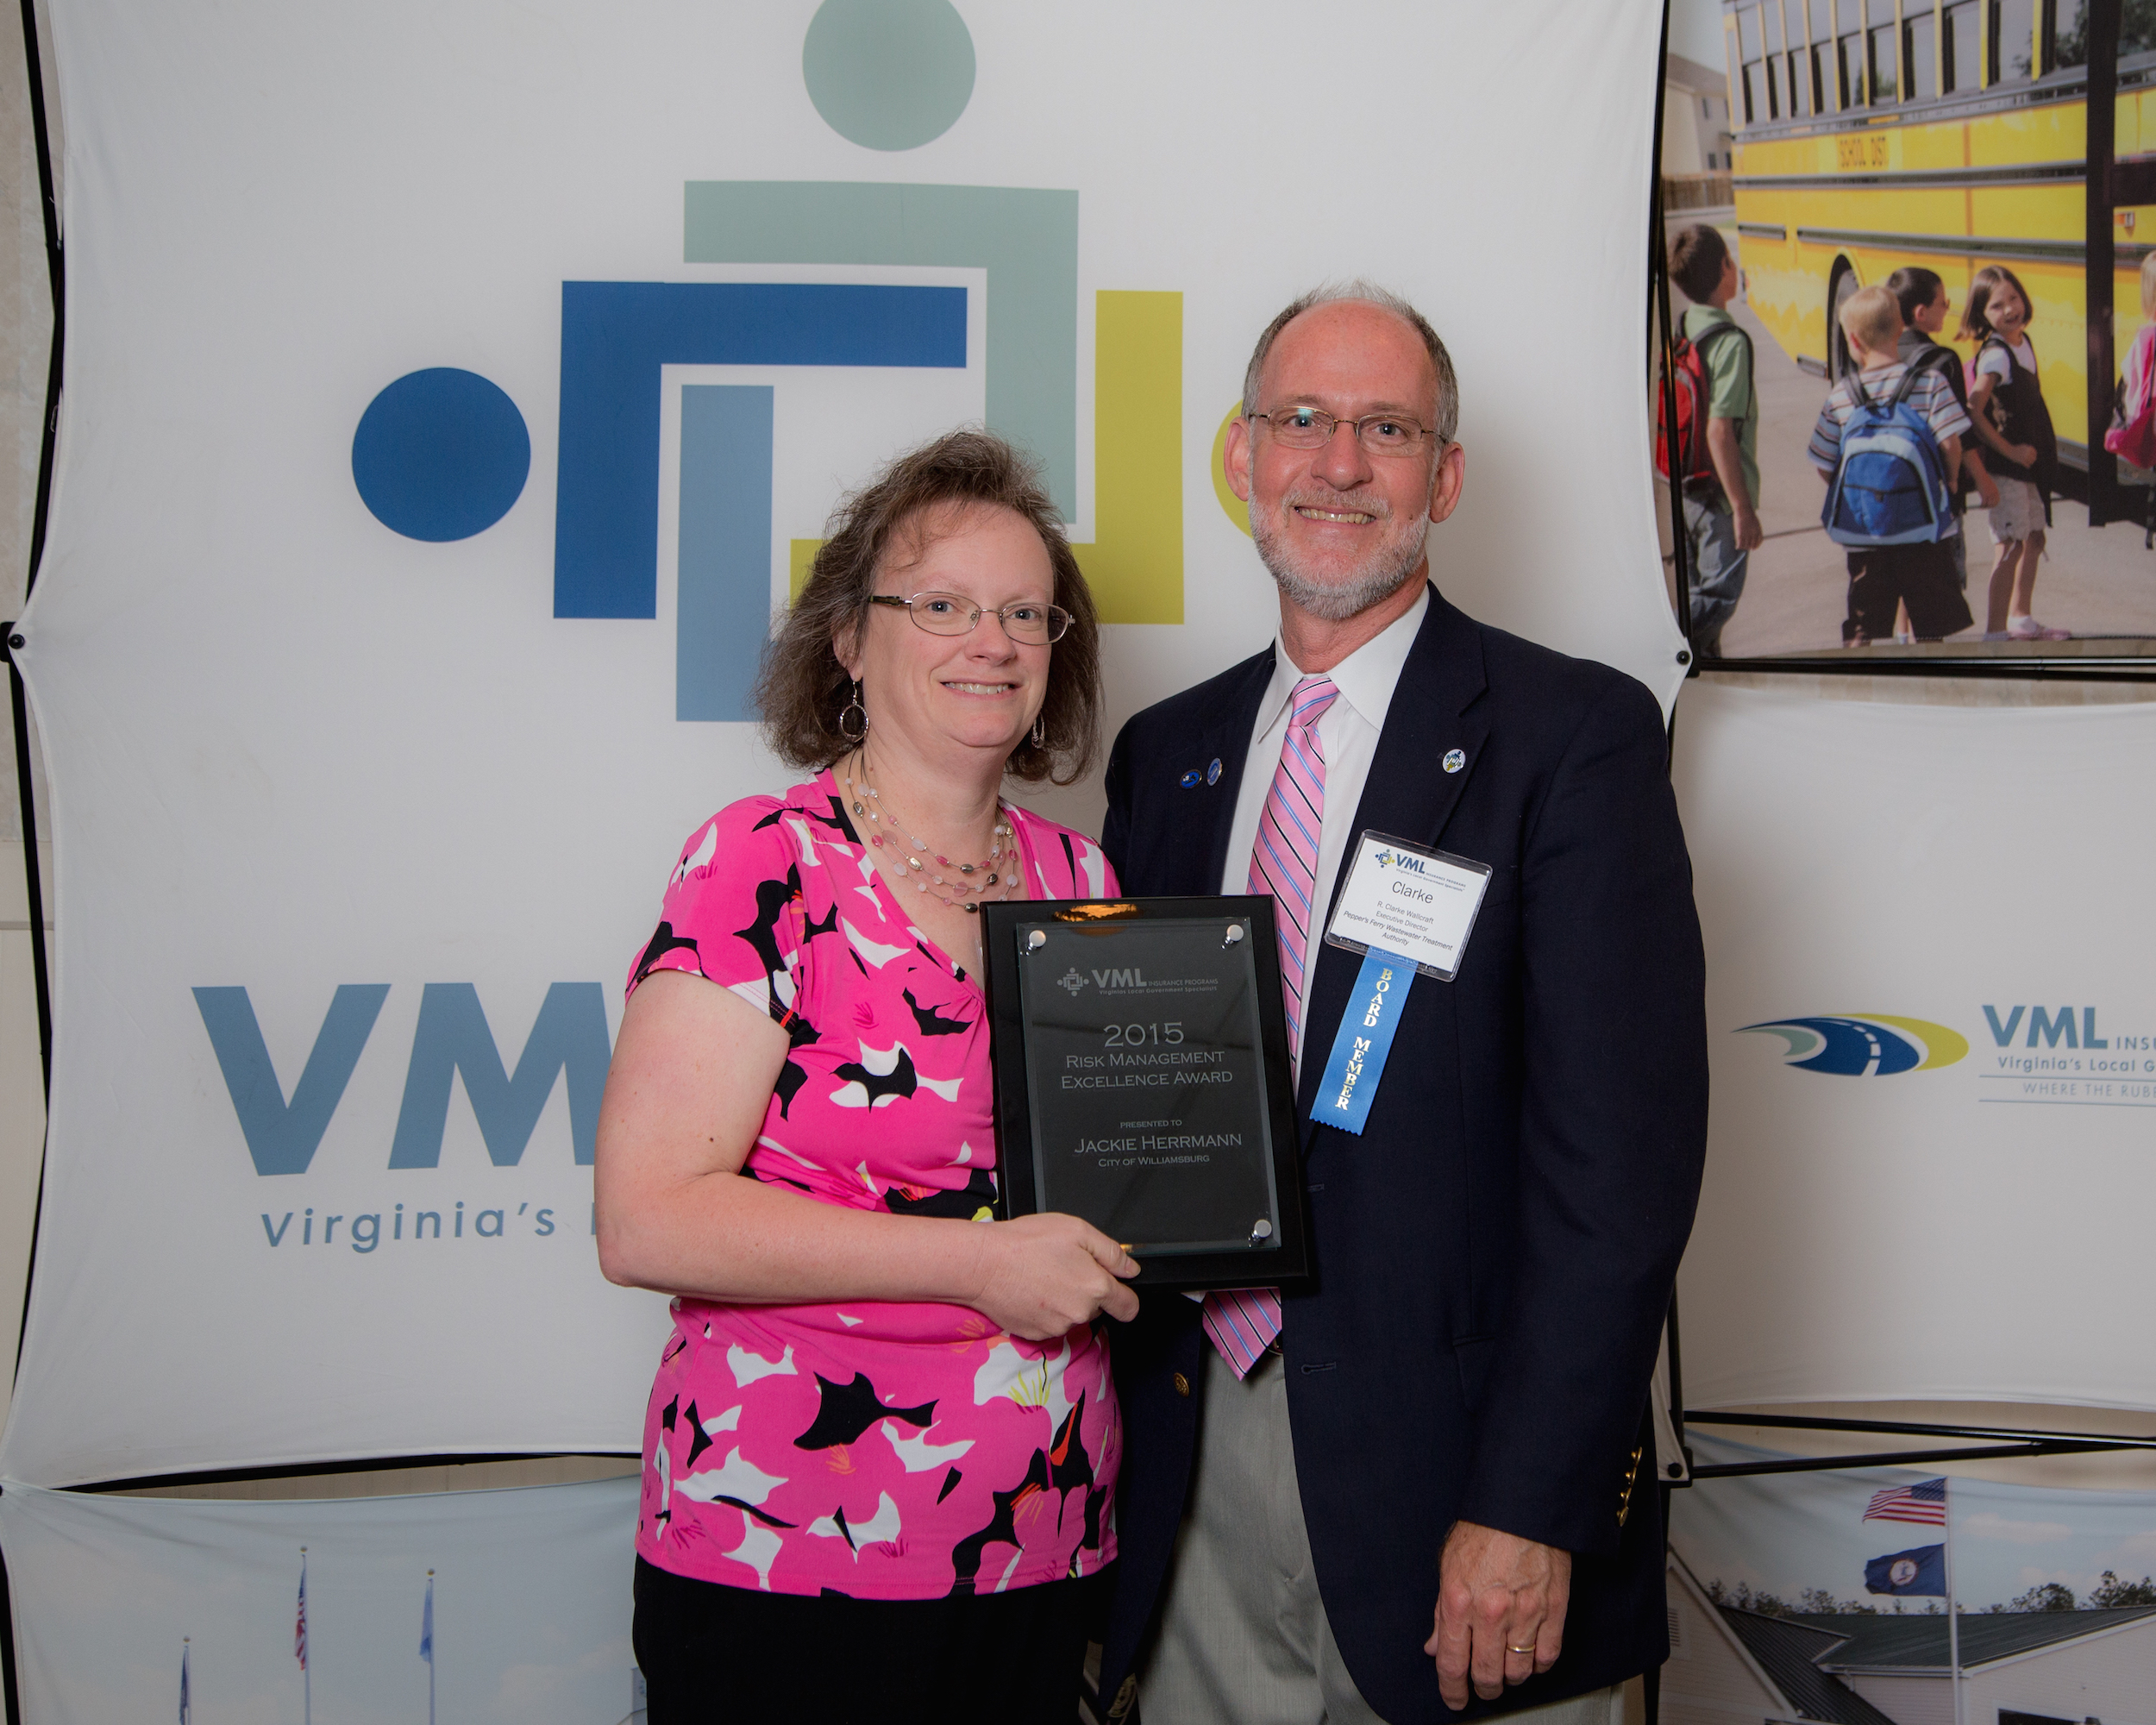 (L to R): Jackie Herrmann with the City of Williamsburg and VMLIP Members’ Supervisory Board Member Clarke Wallcraft